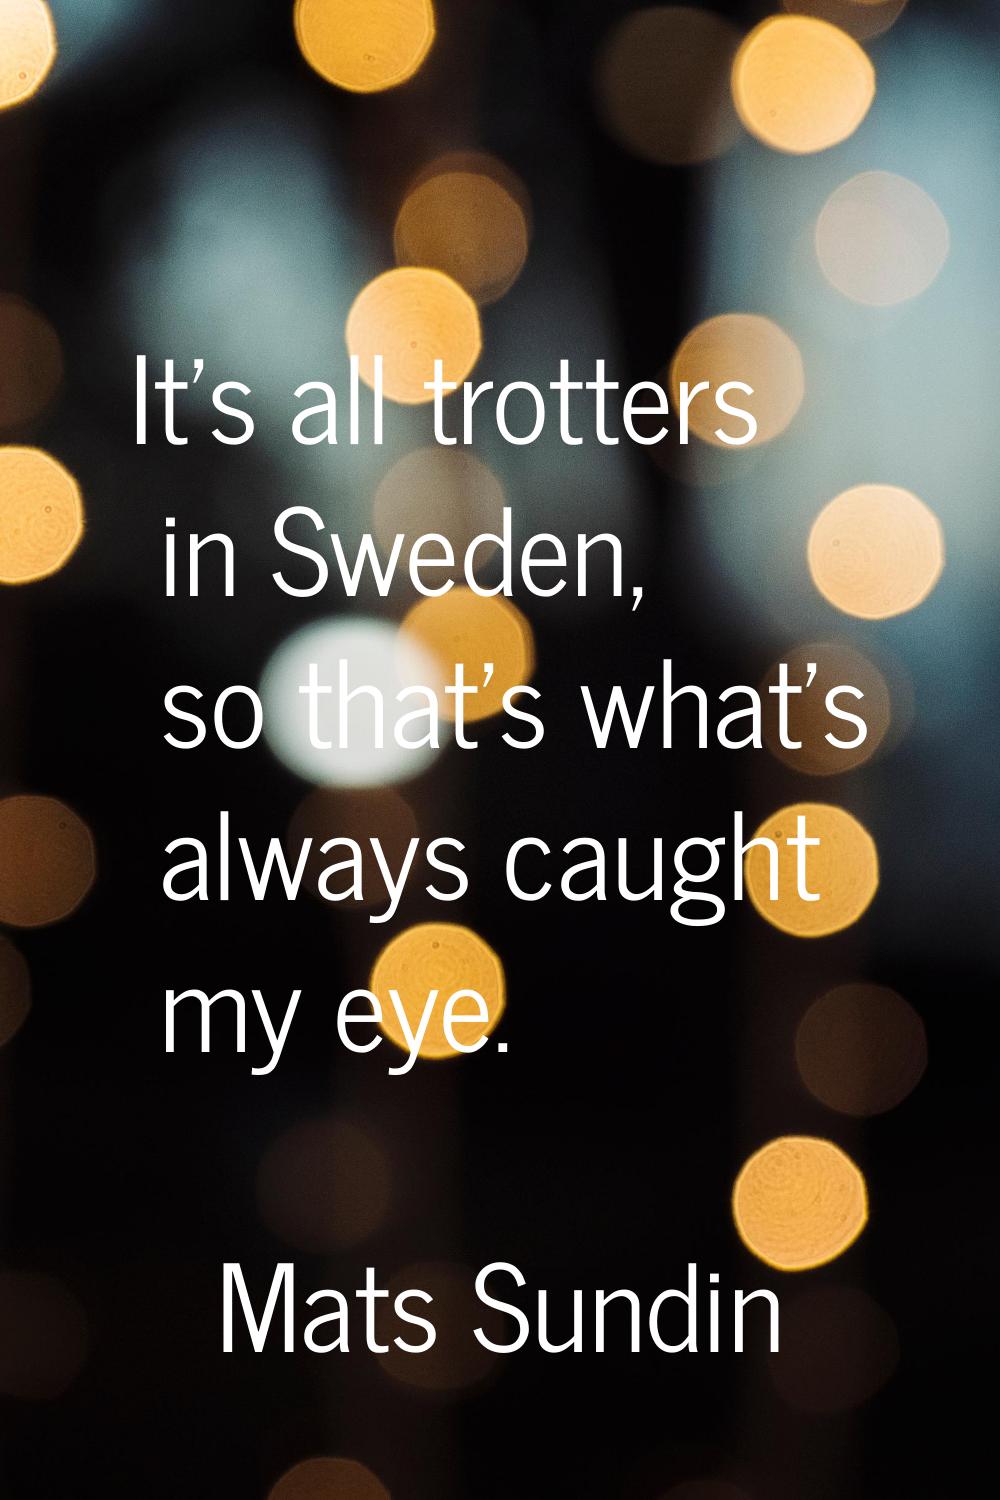 It's all trotters in Sweden, so that's what's always caught my eye.